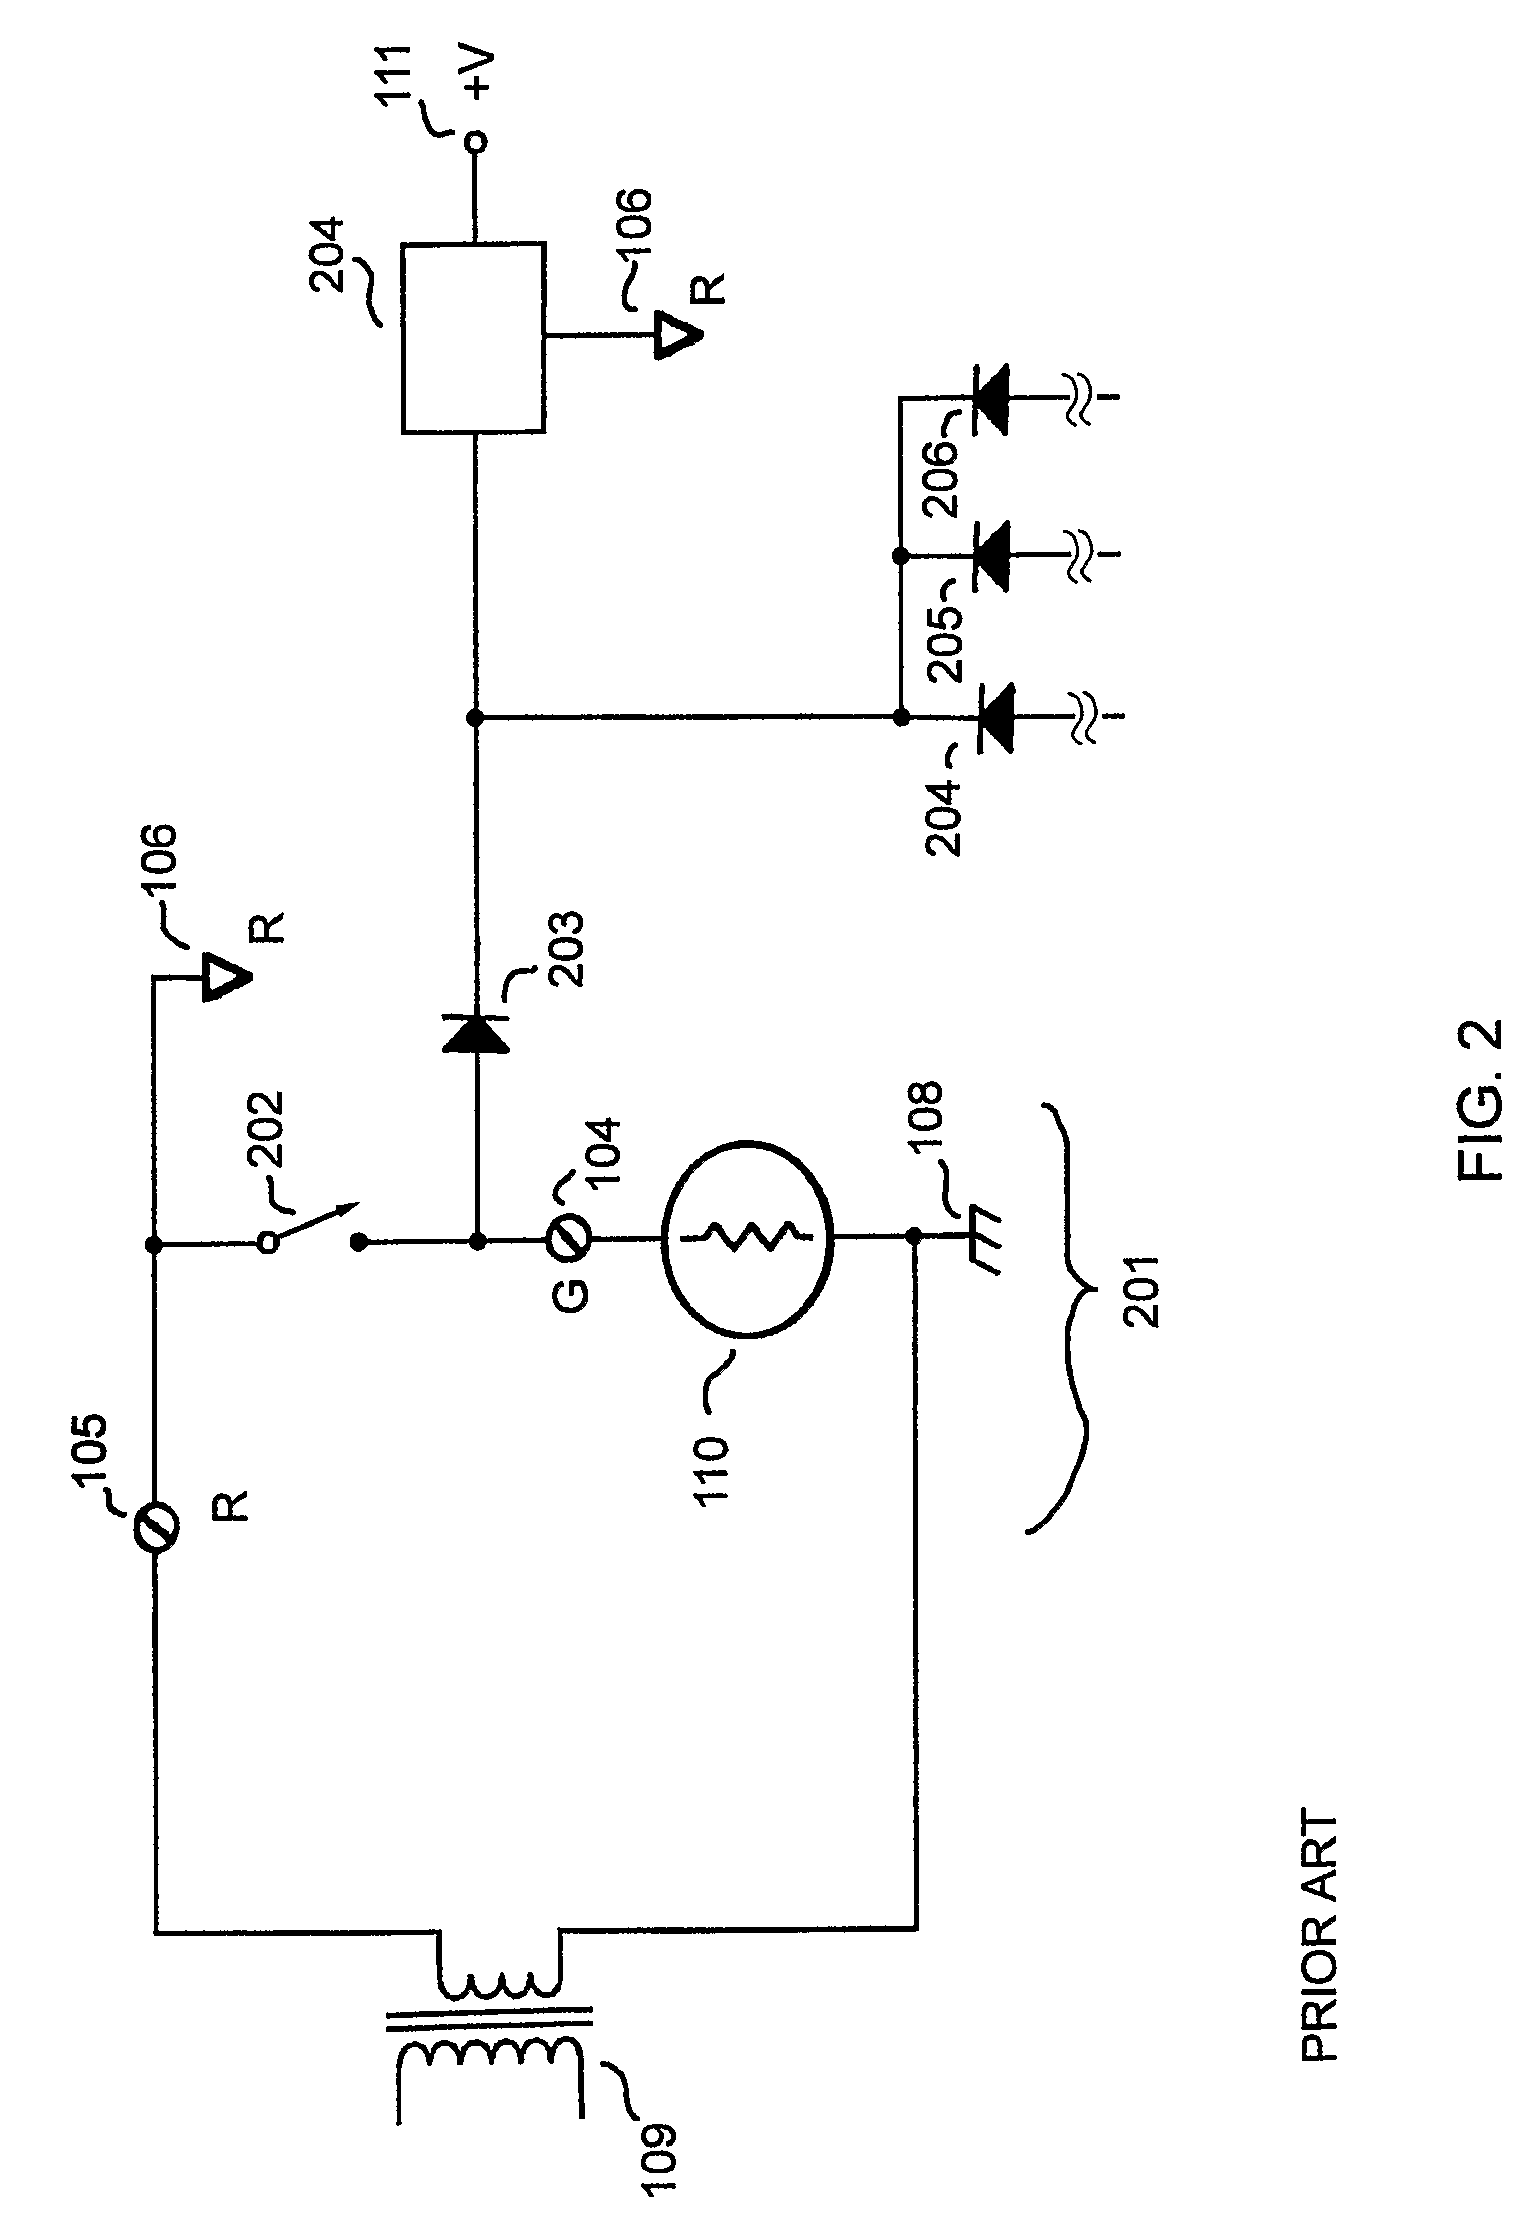 Power stealing for a thermostat using a TRIAC with FET control